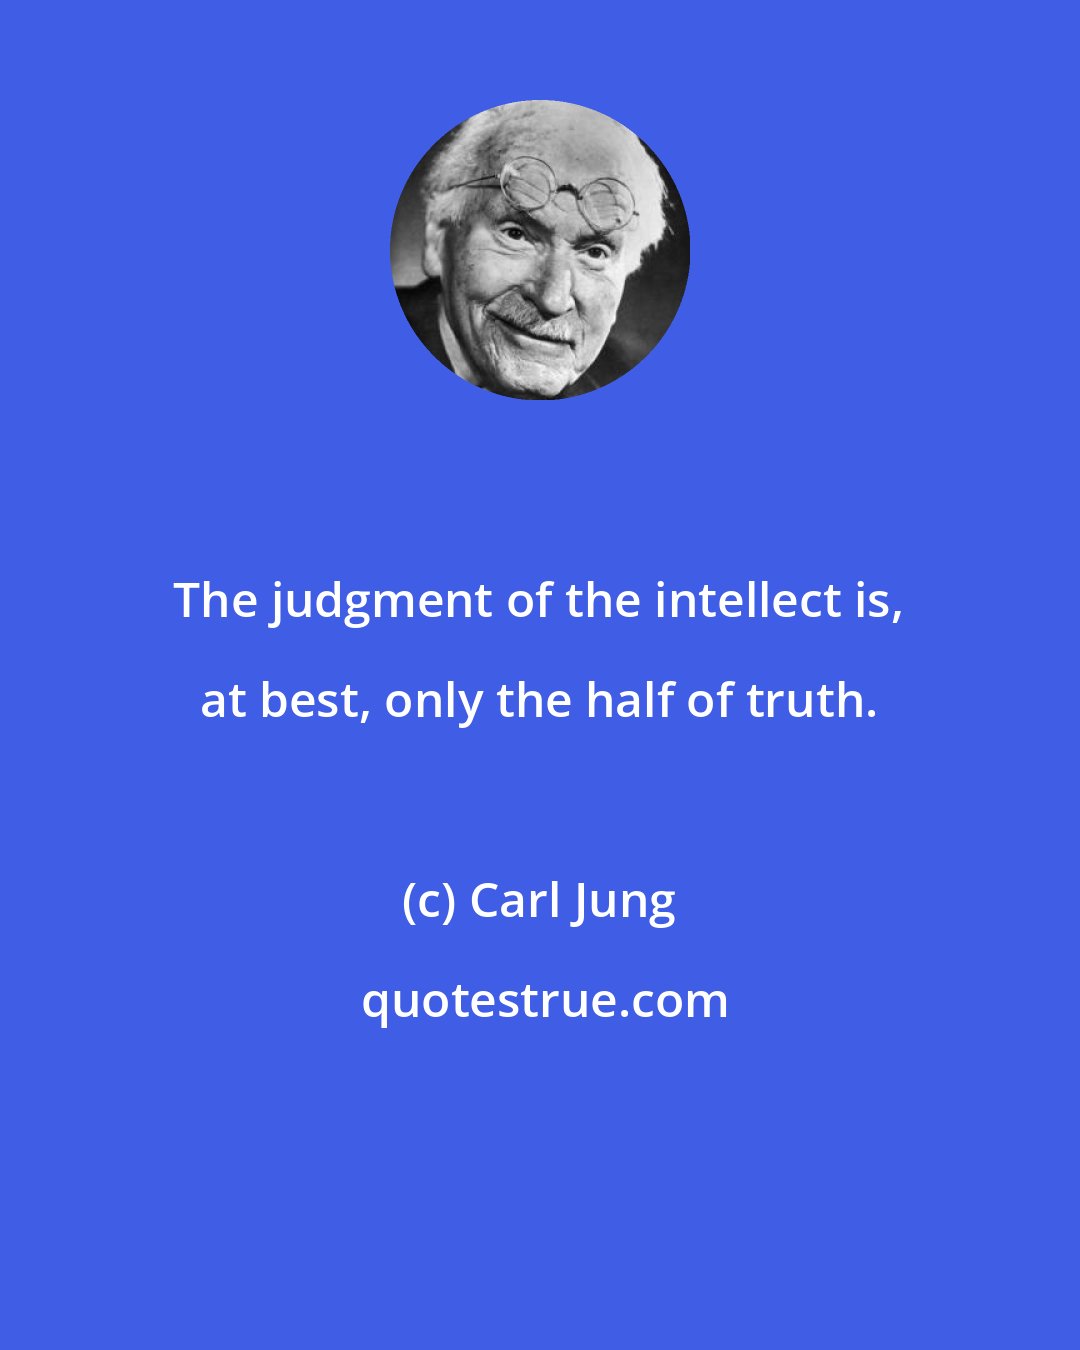 Carl Jung: The judgment of the intellect is, at best, only the half of truth.